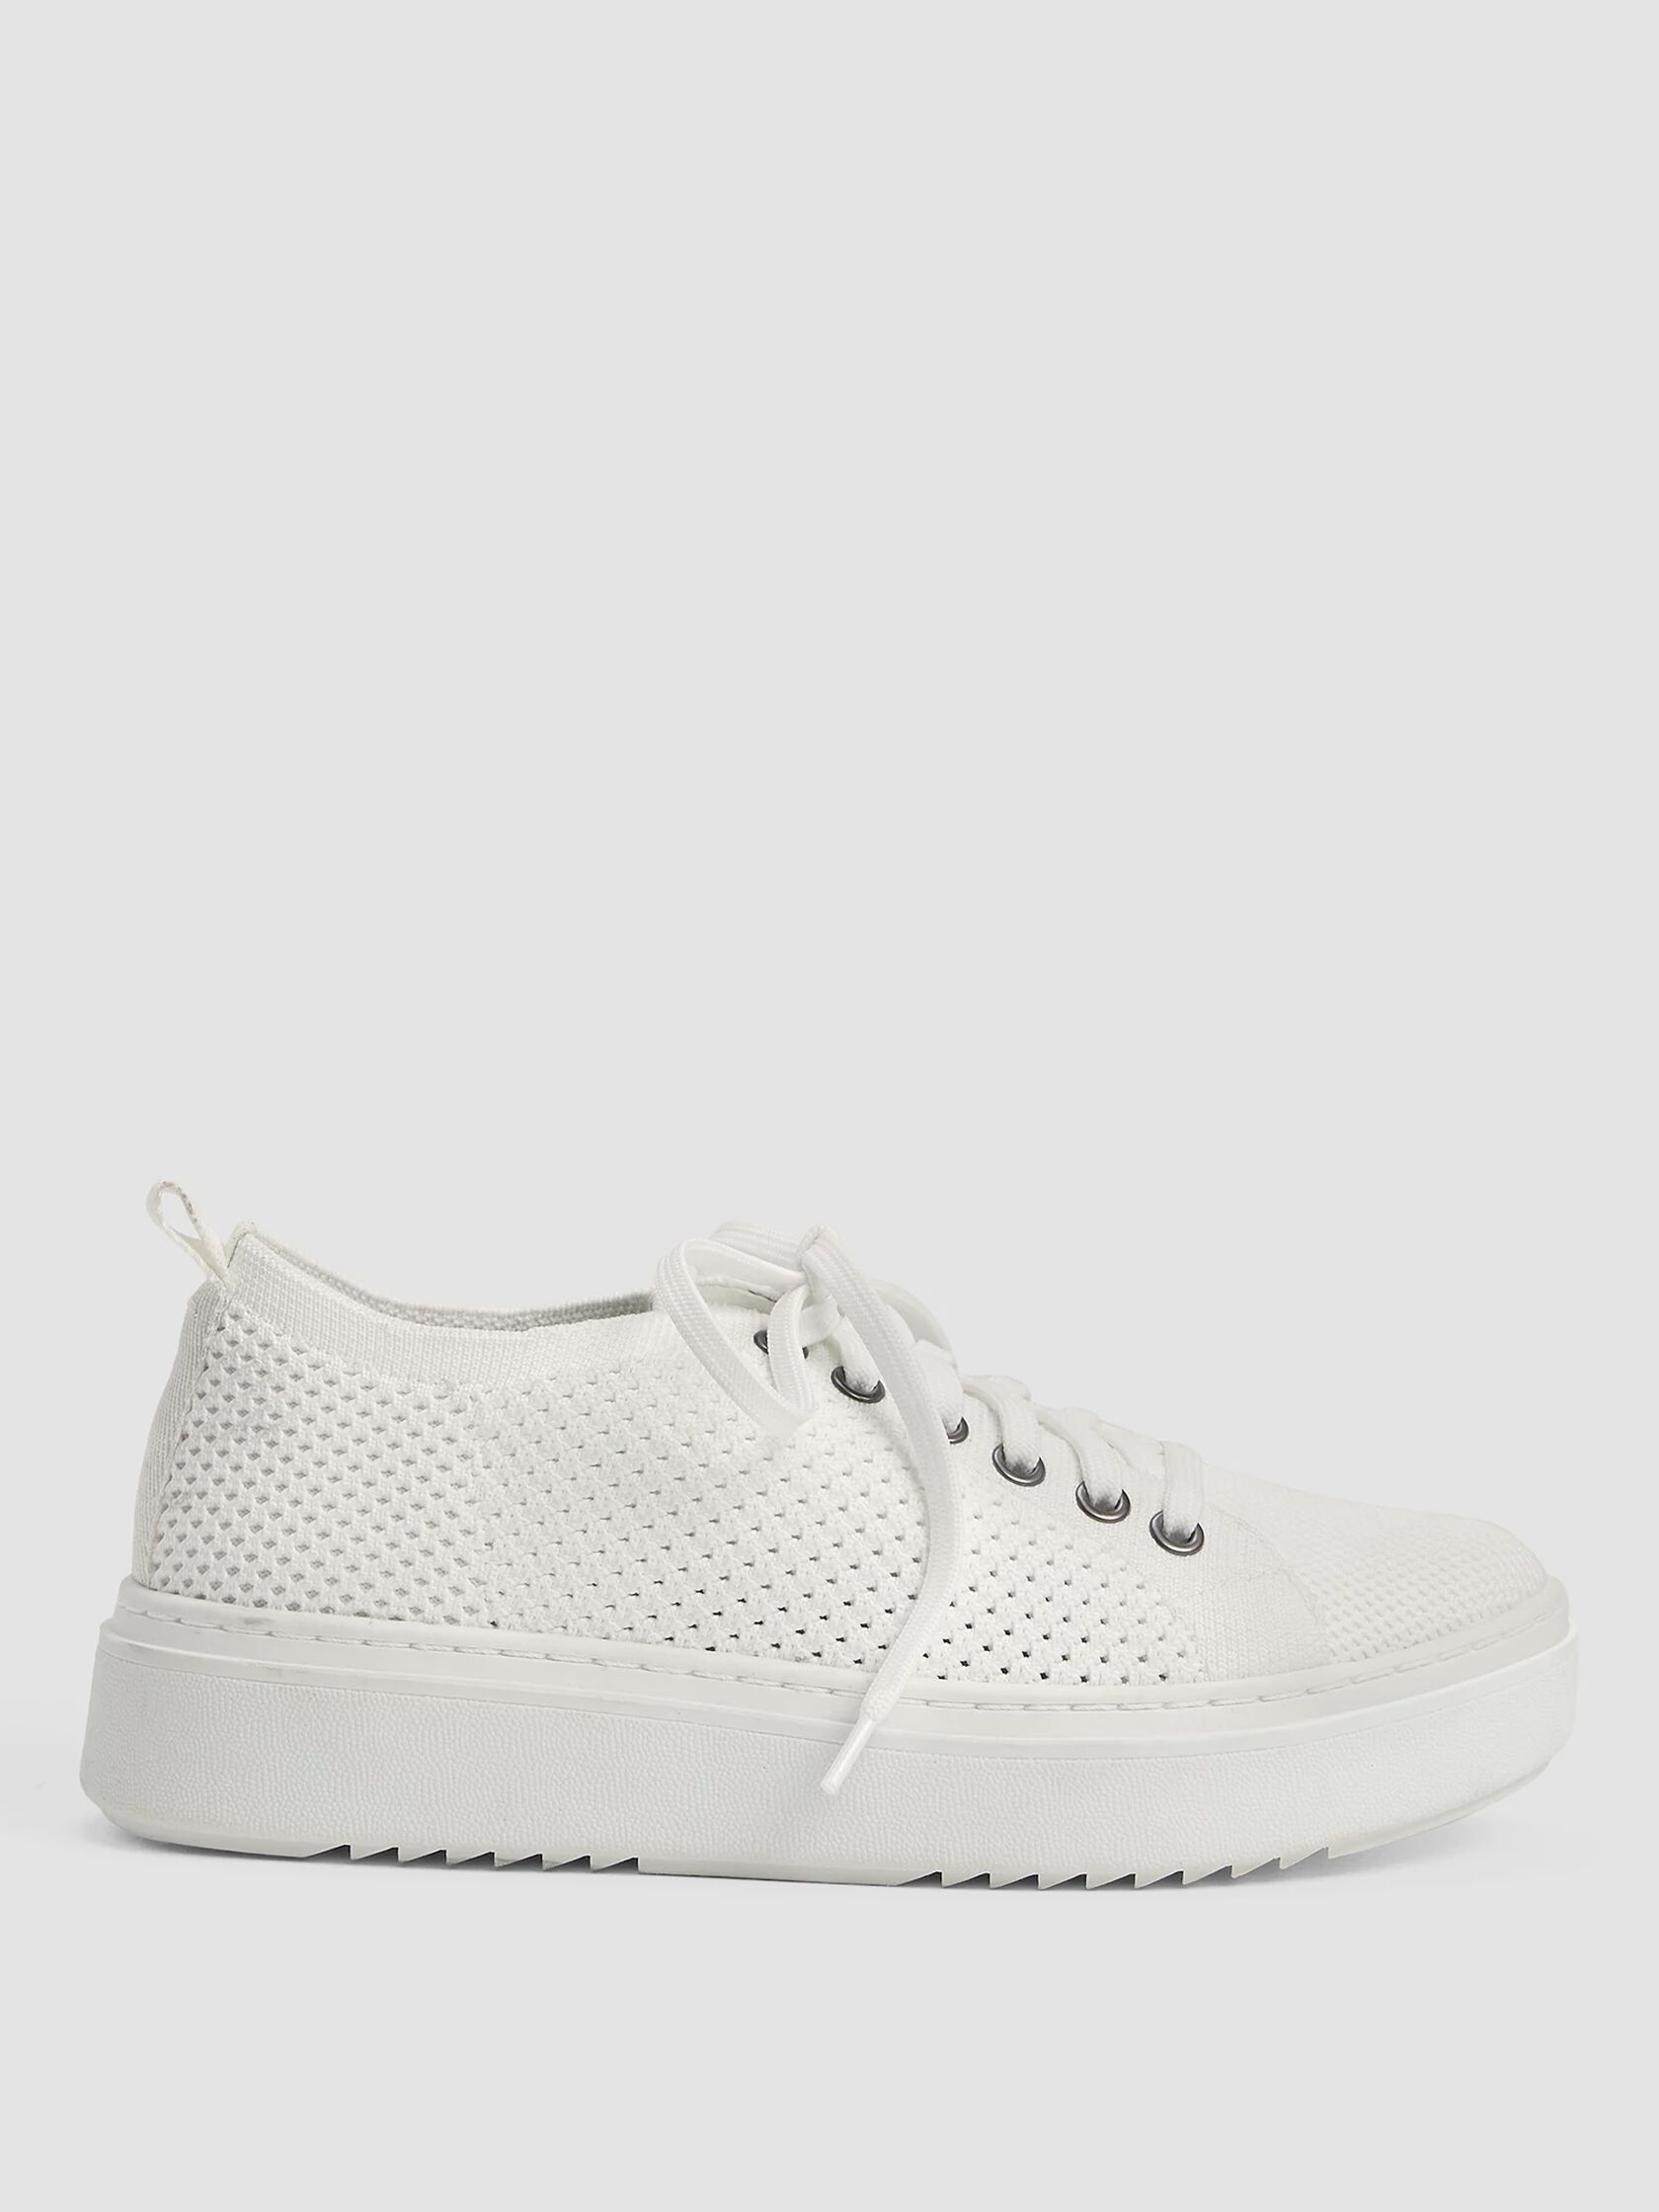 Peris Recycled Stretch Knit Wedge Sneaker | Eileen Fisher